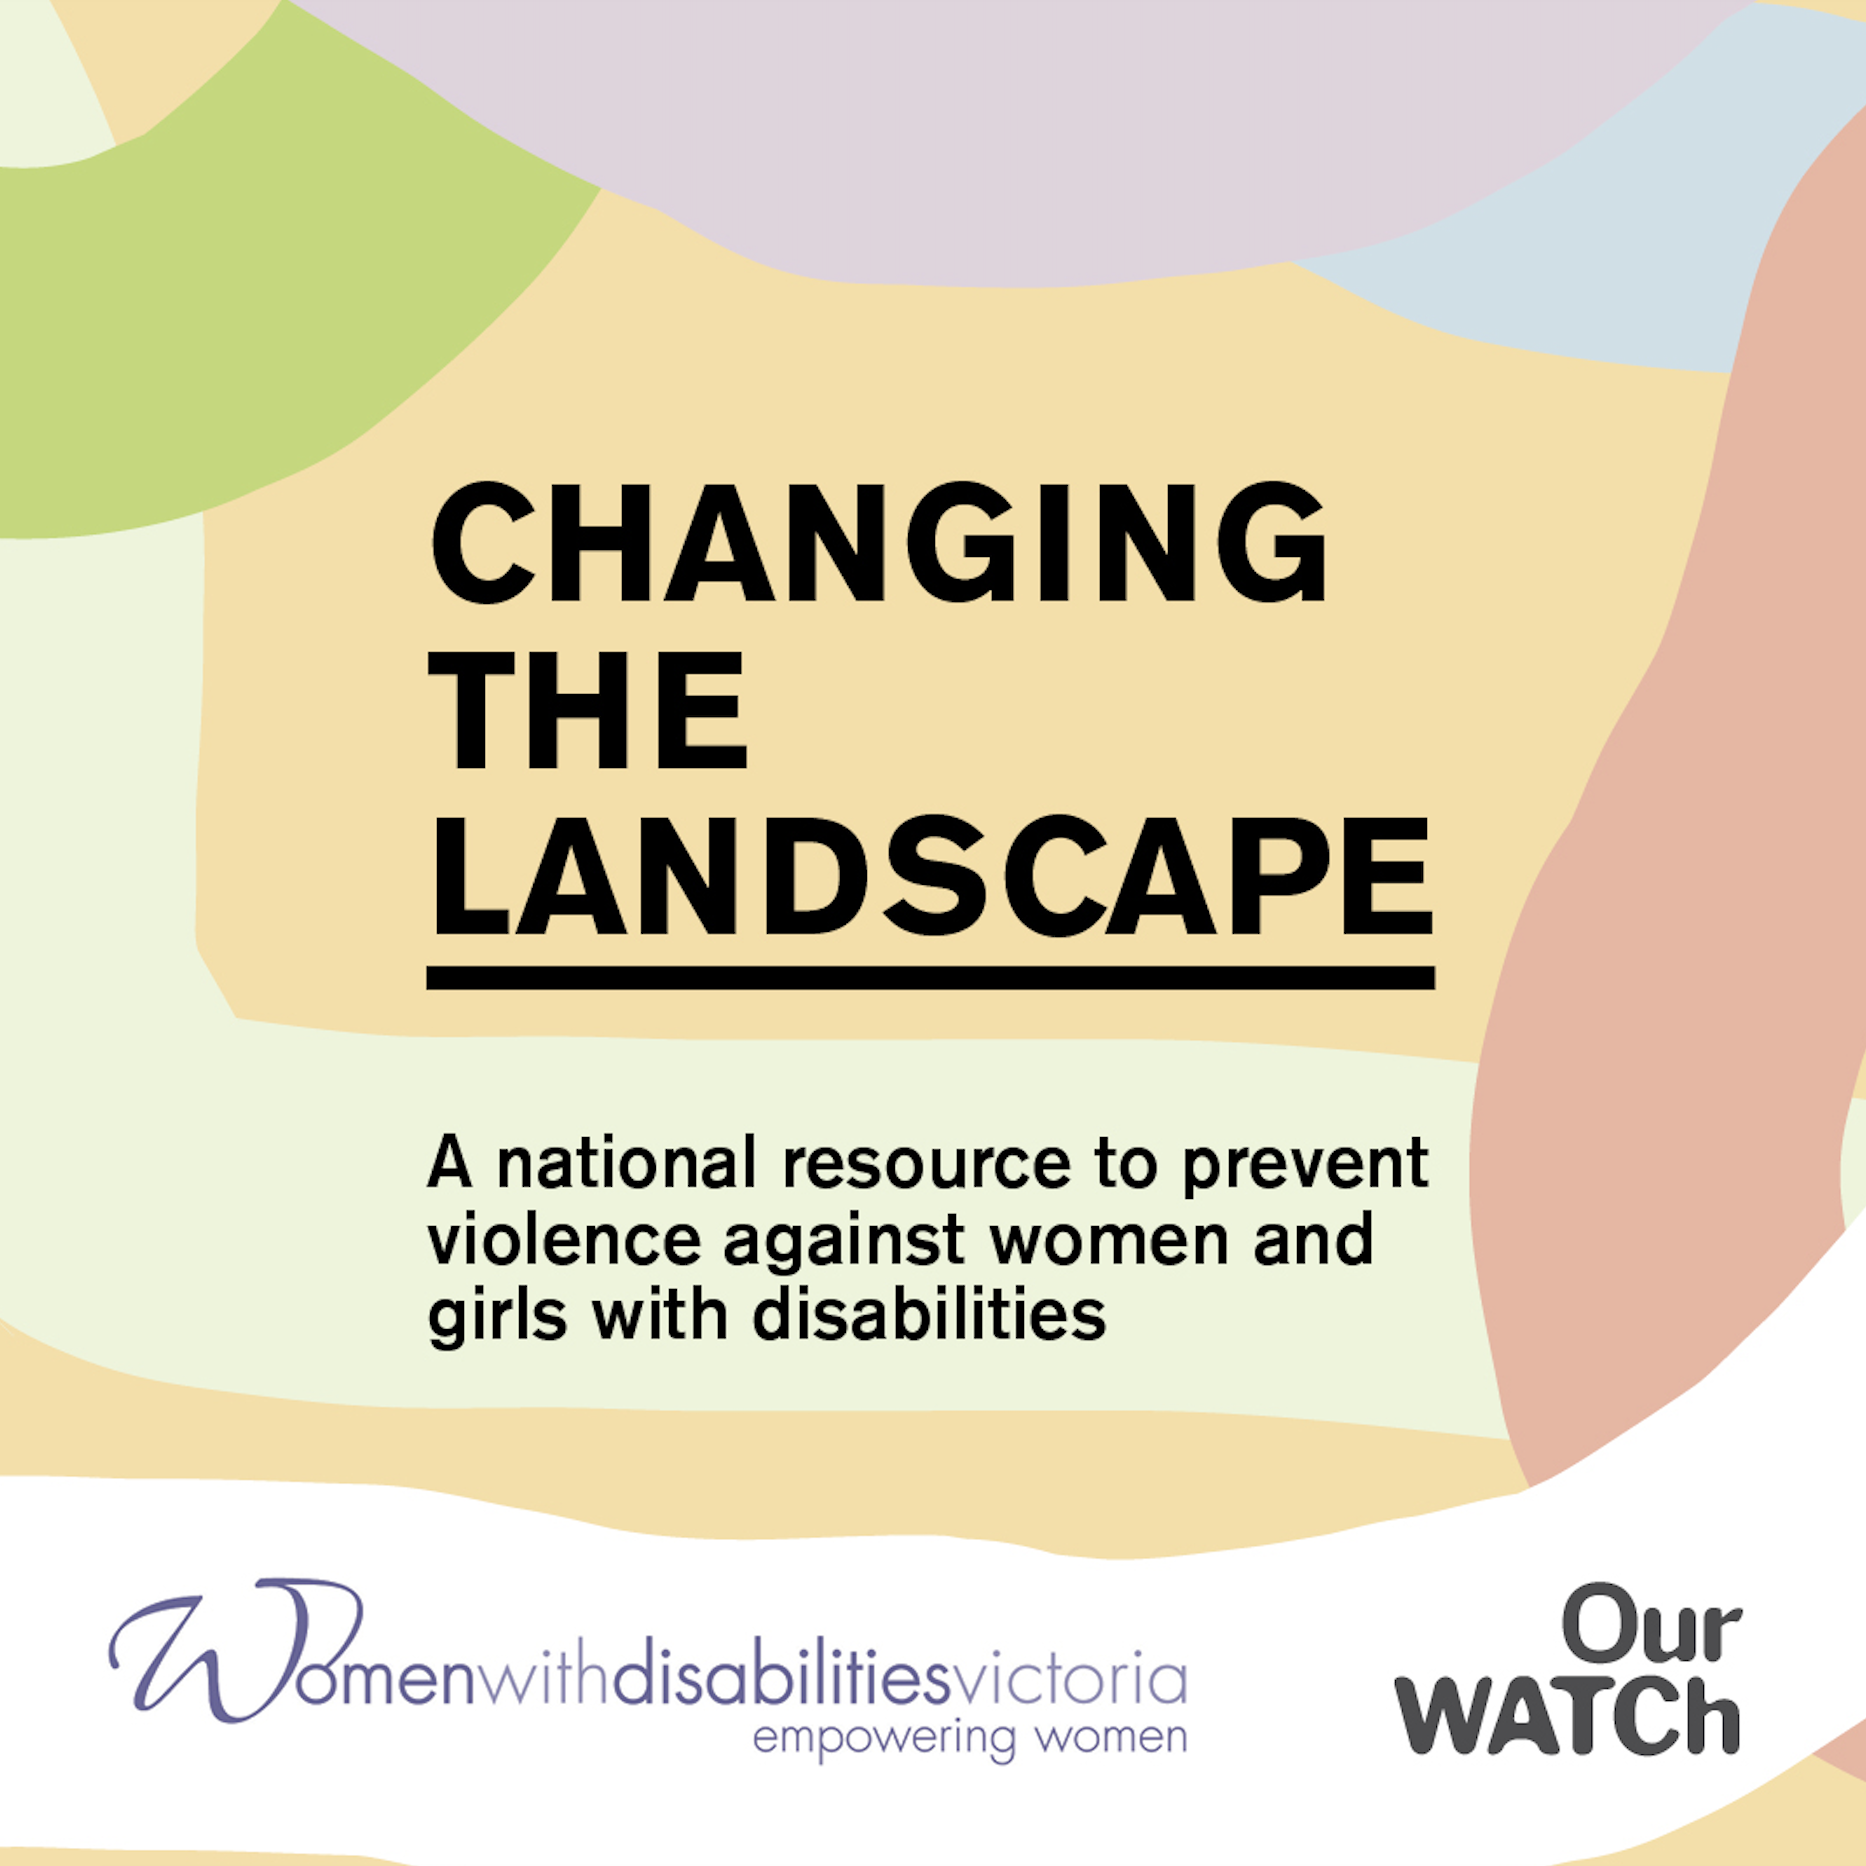 Colourful geometric background behind the name of the report: Changing the Landscape, a national resource to prevent violence against women and girls with disabilities'